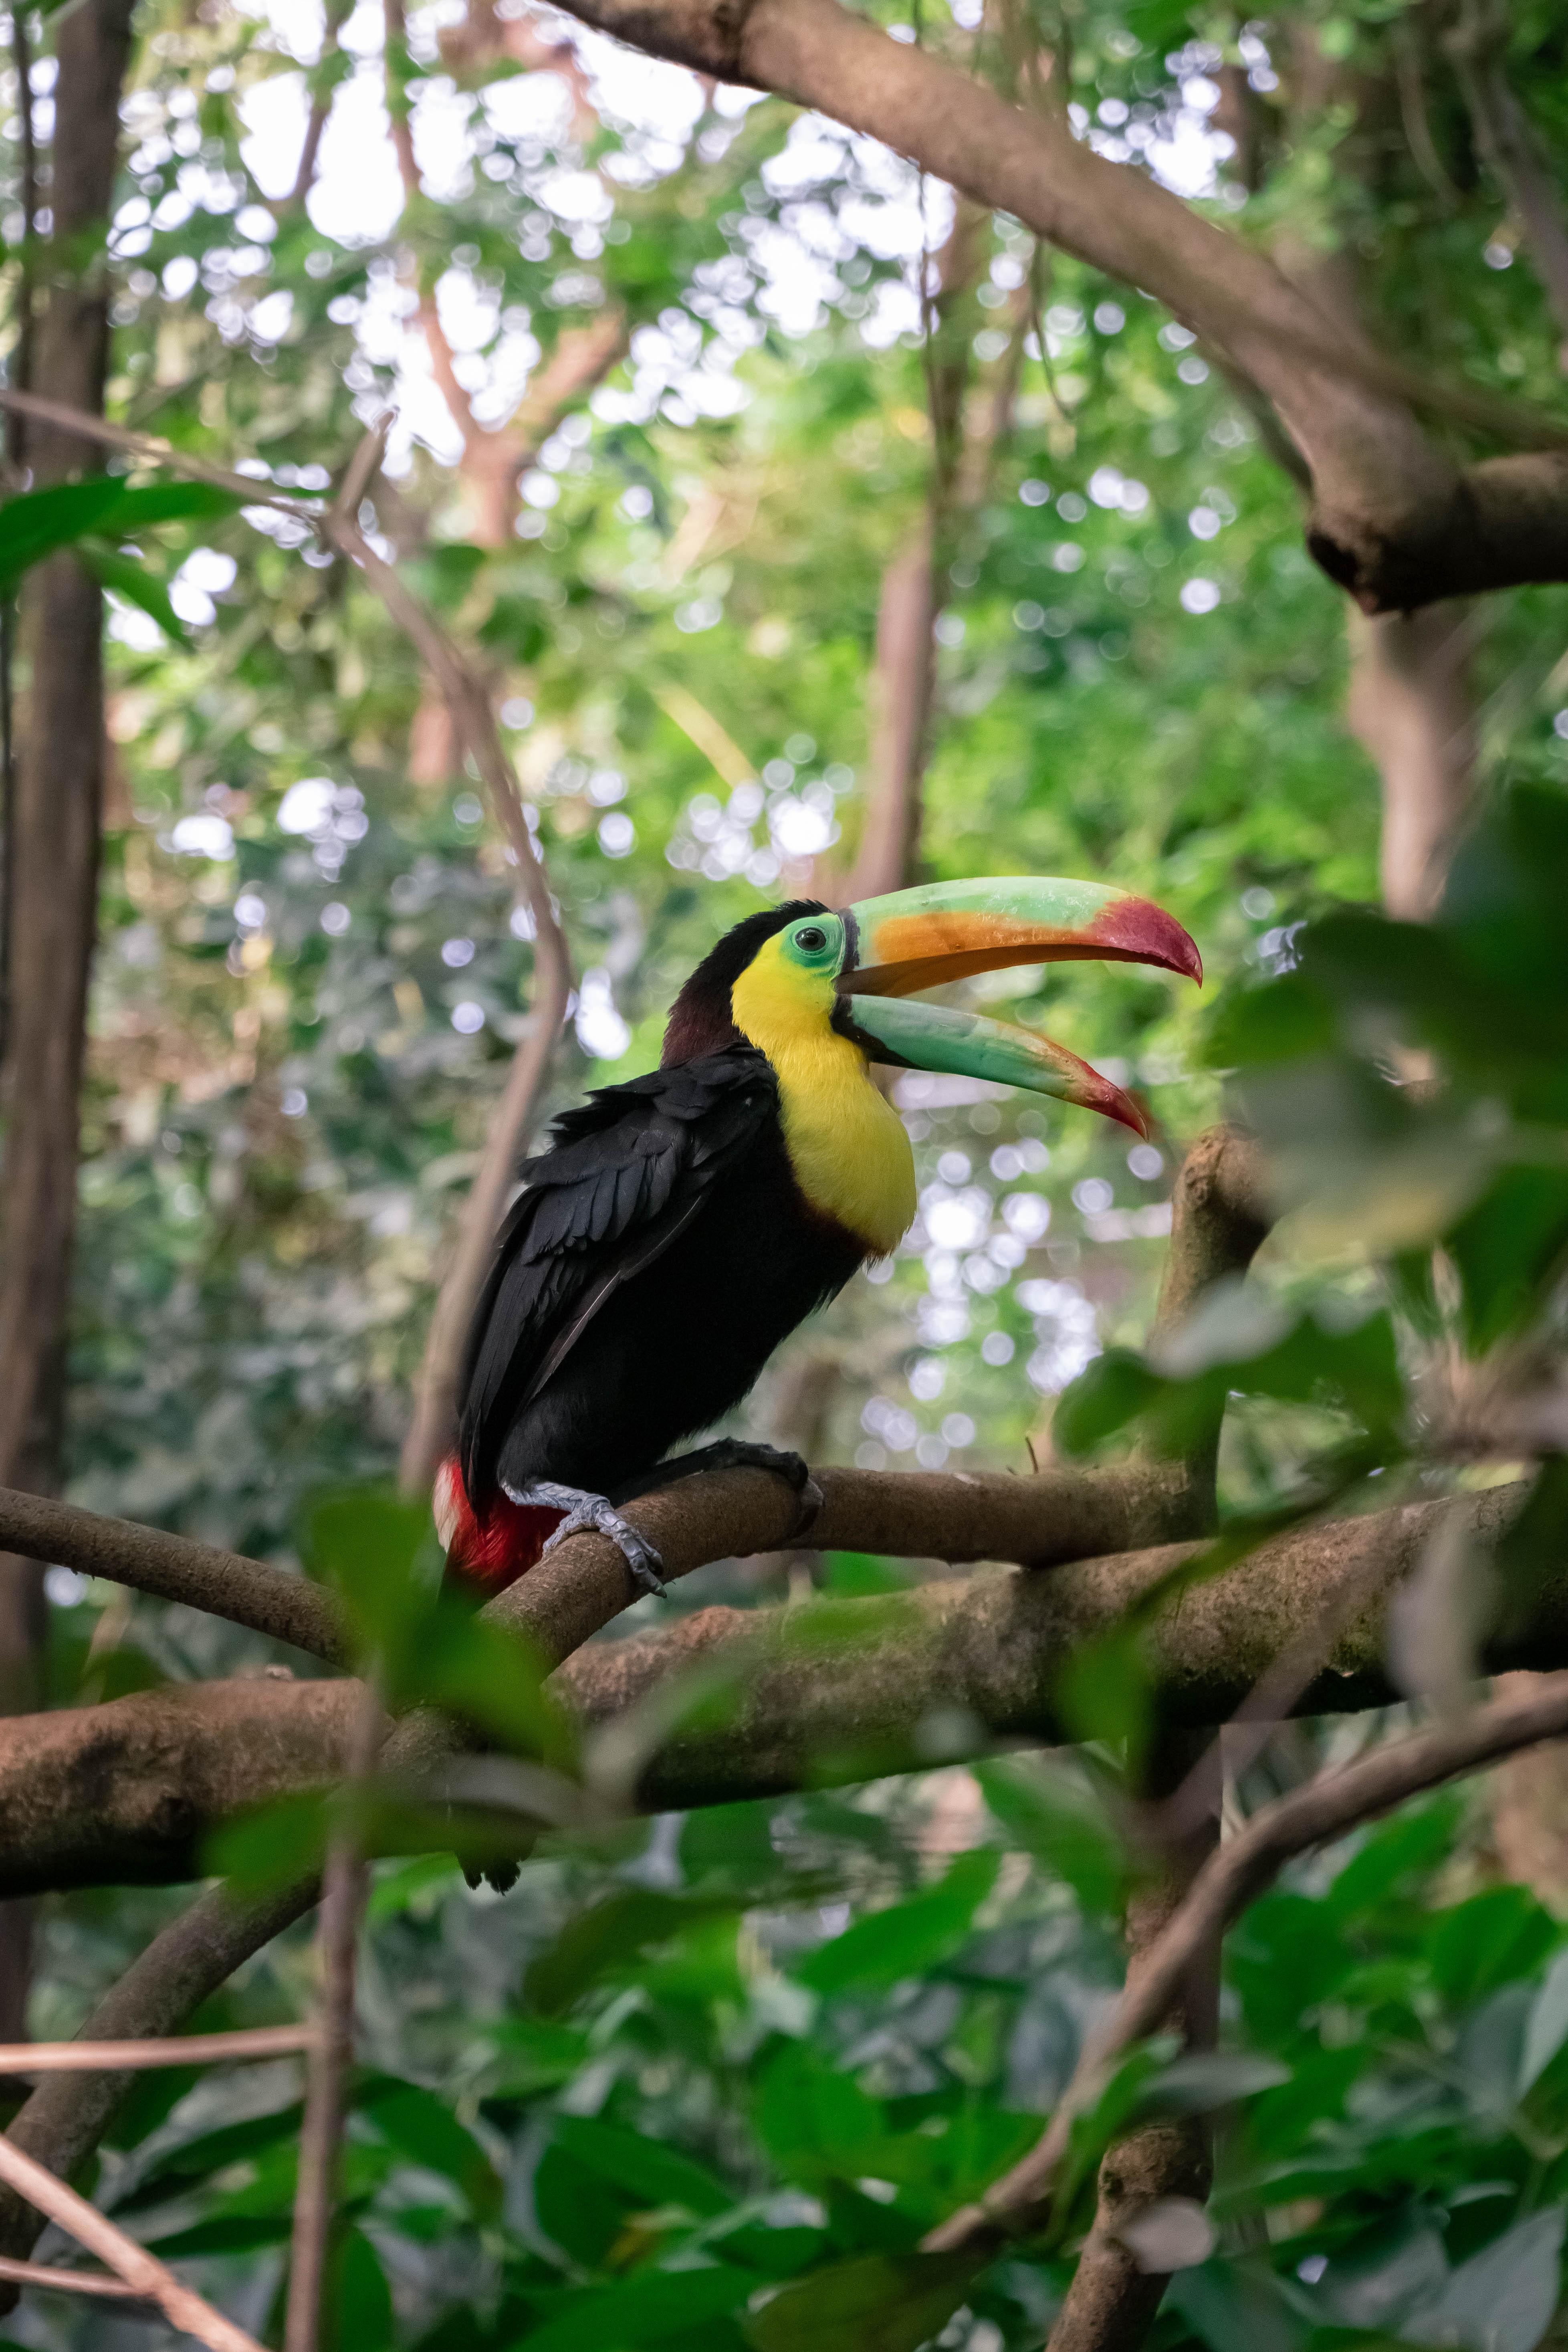 Photo of a bird in the rainforest